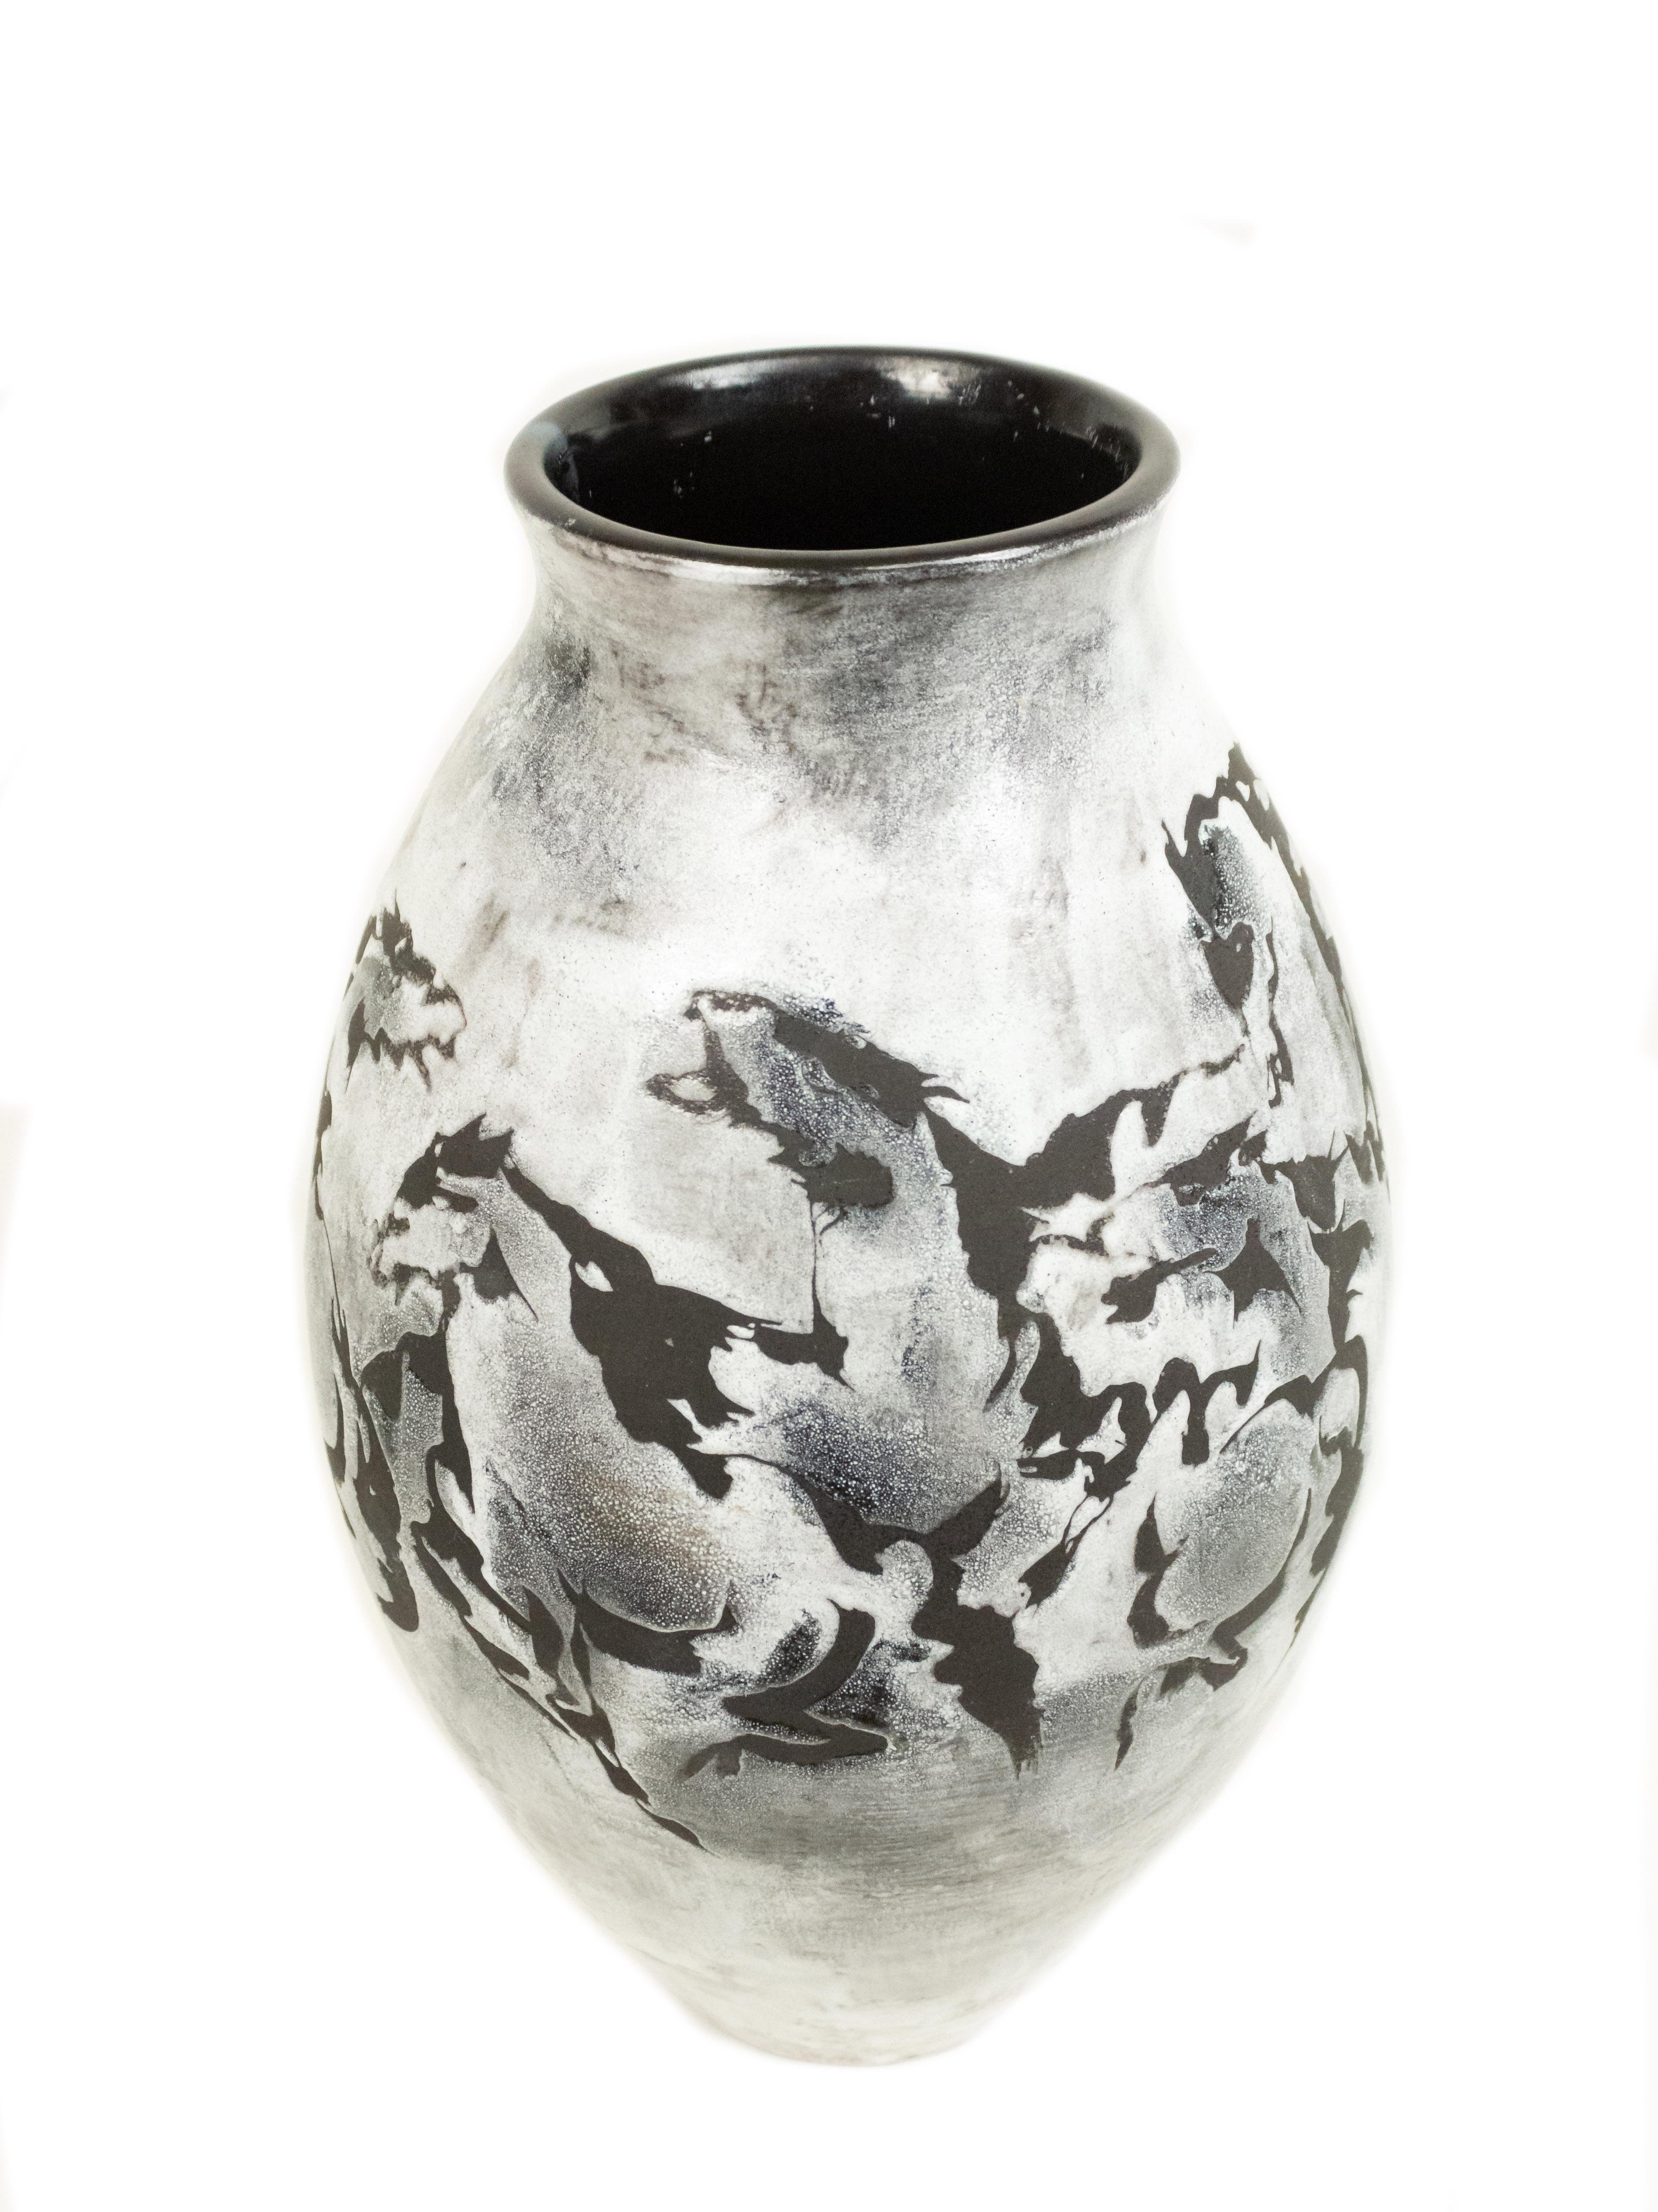 White and black vase with running horse design. Signed on bottom by maker.